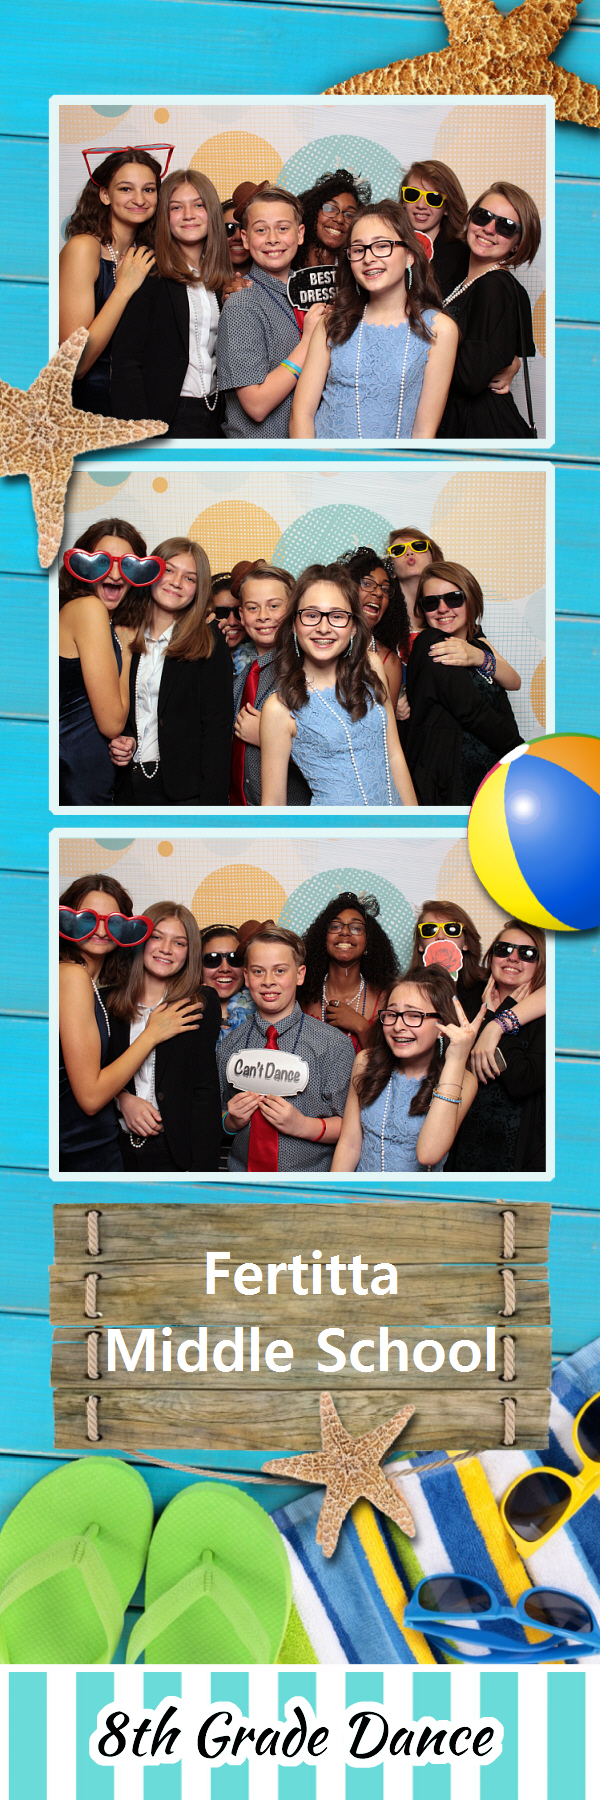 2x6 photo strip group posing with props sunglasses and stitches backdrop